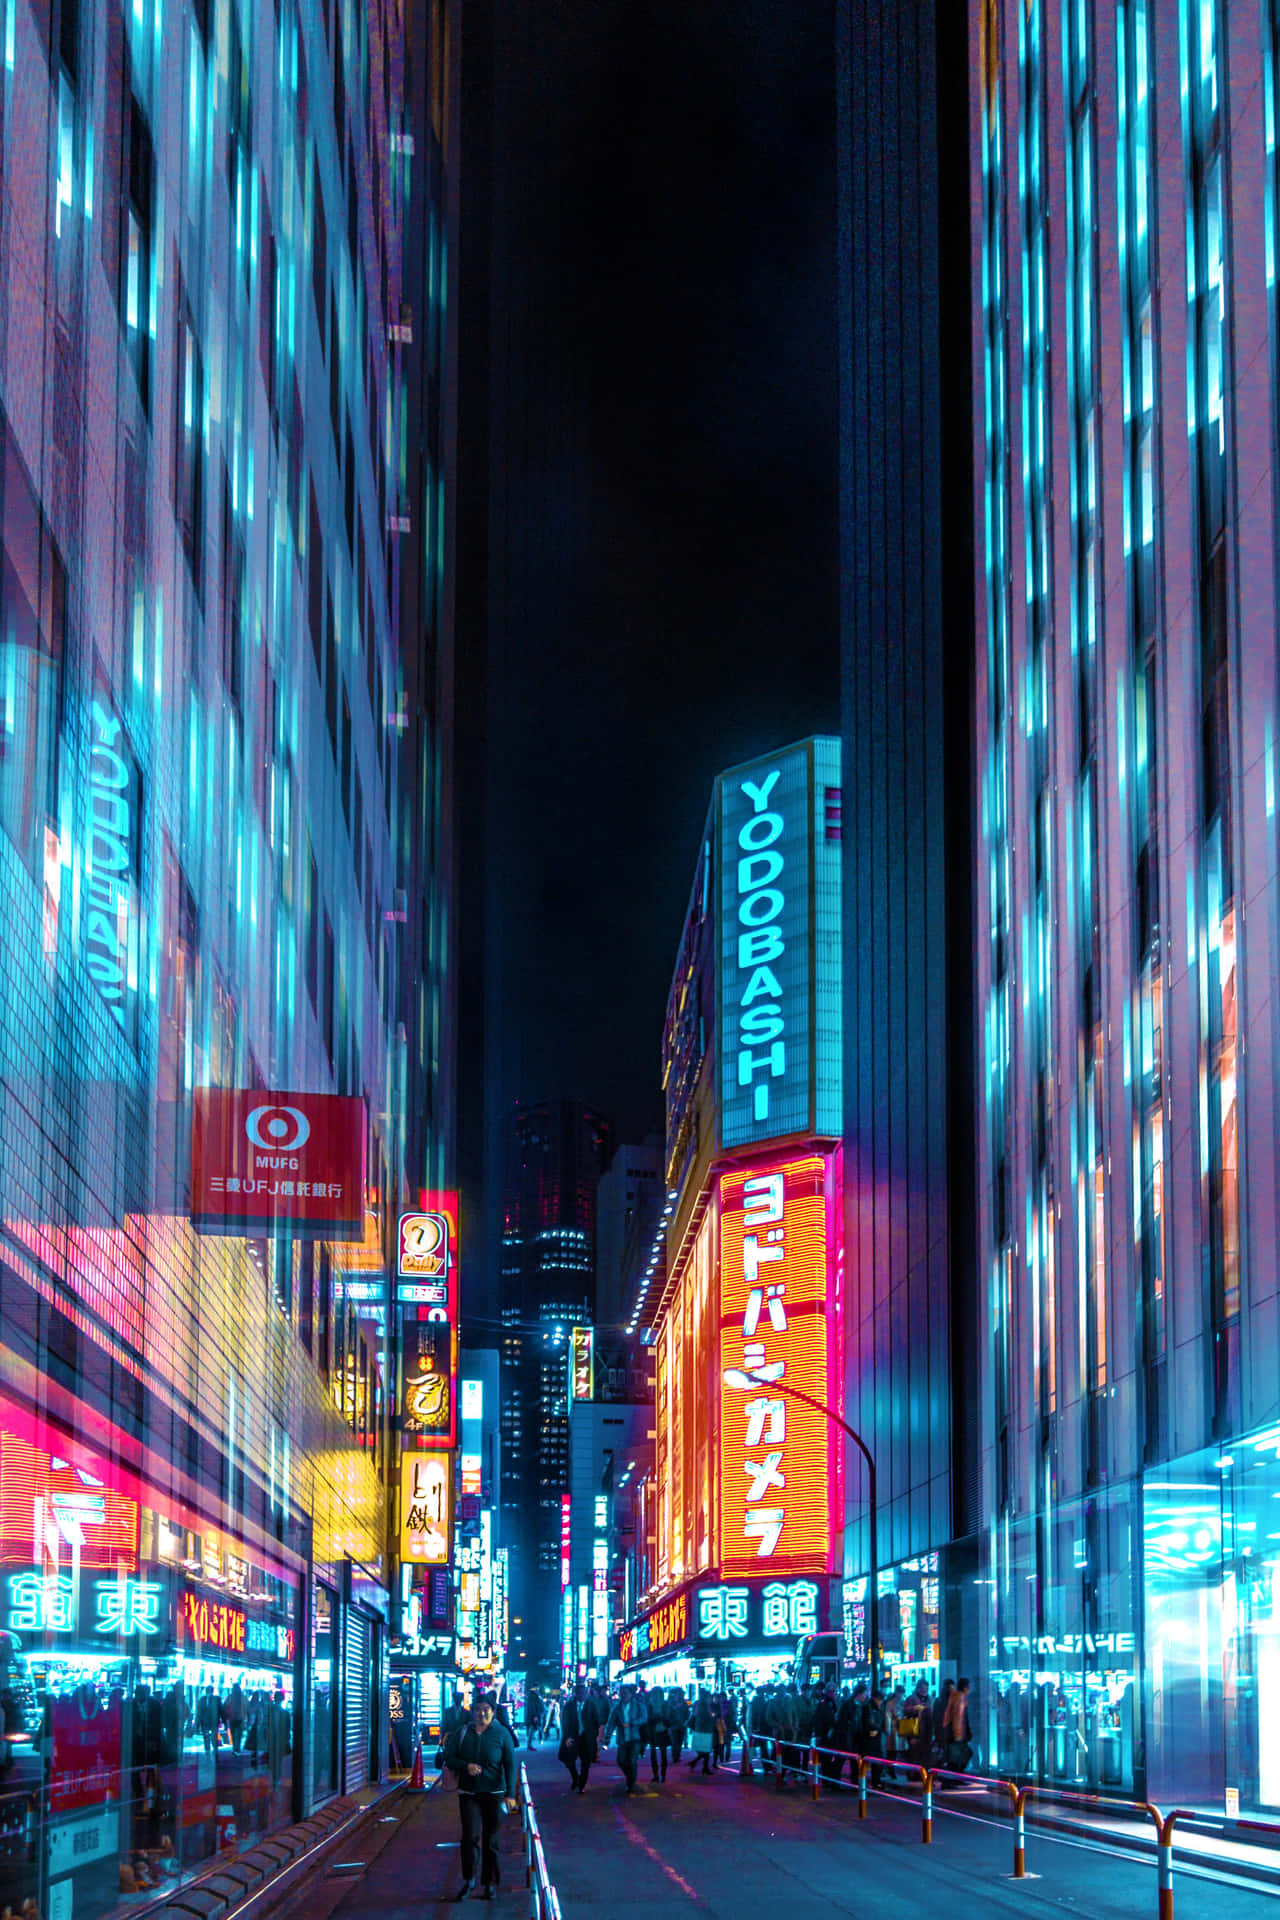 Explore the vibrant city of Tokyo at night